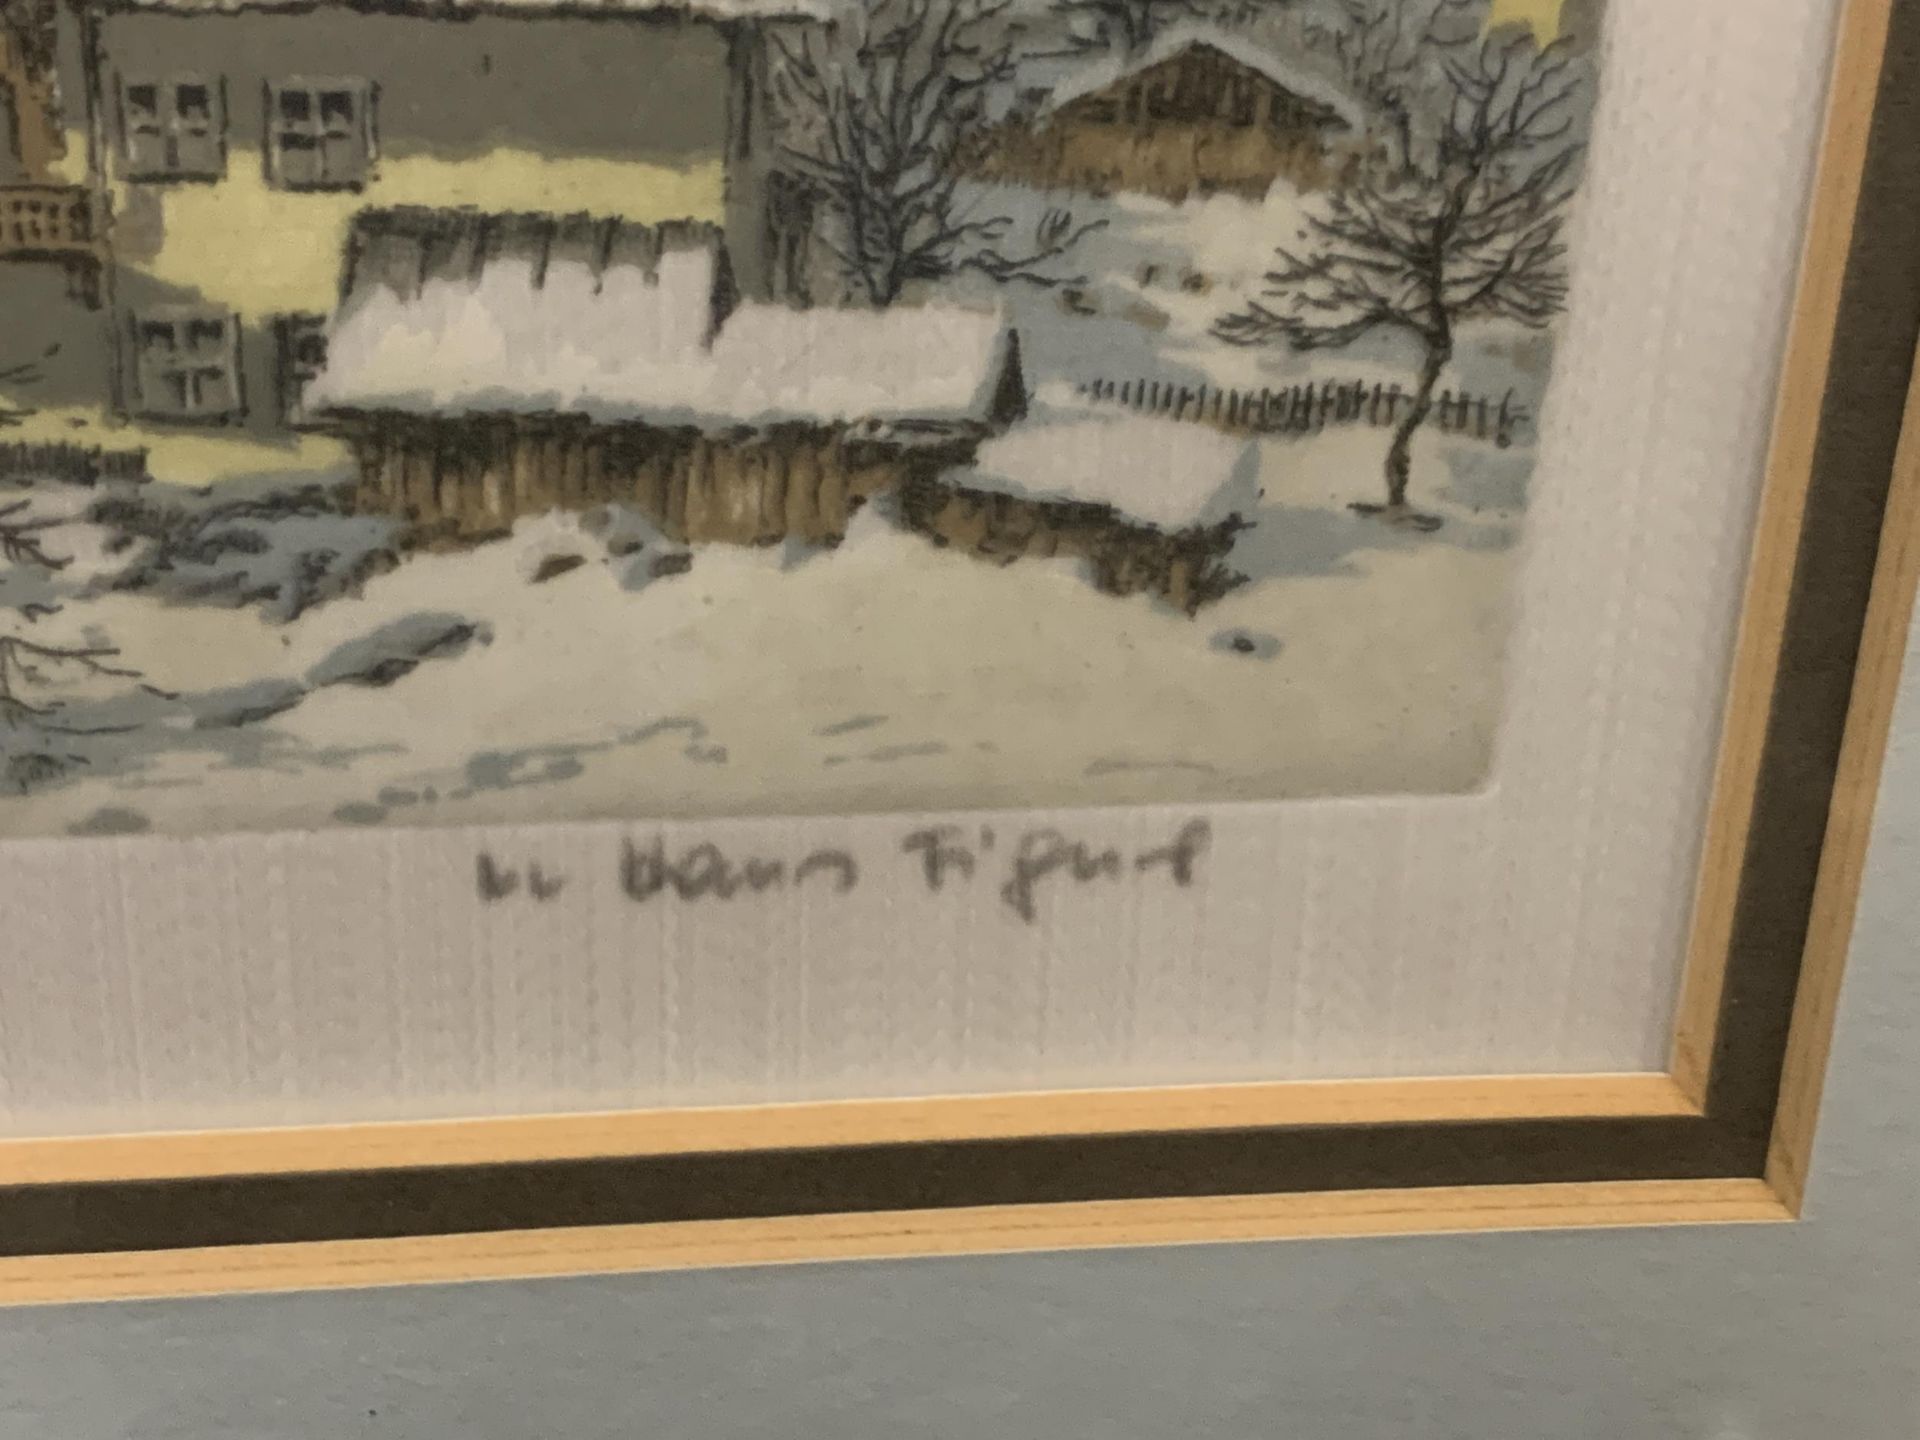 A FRAMED PRINT OF A SNOWY VILLAGE BY HANS FIGURA - Image 3 of 4